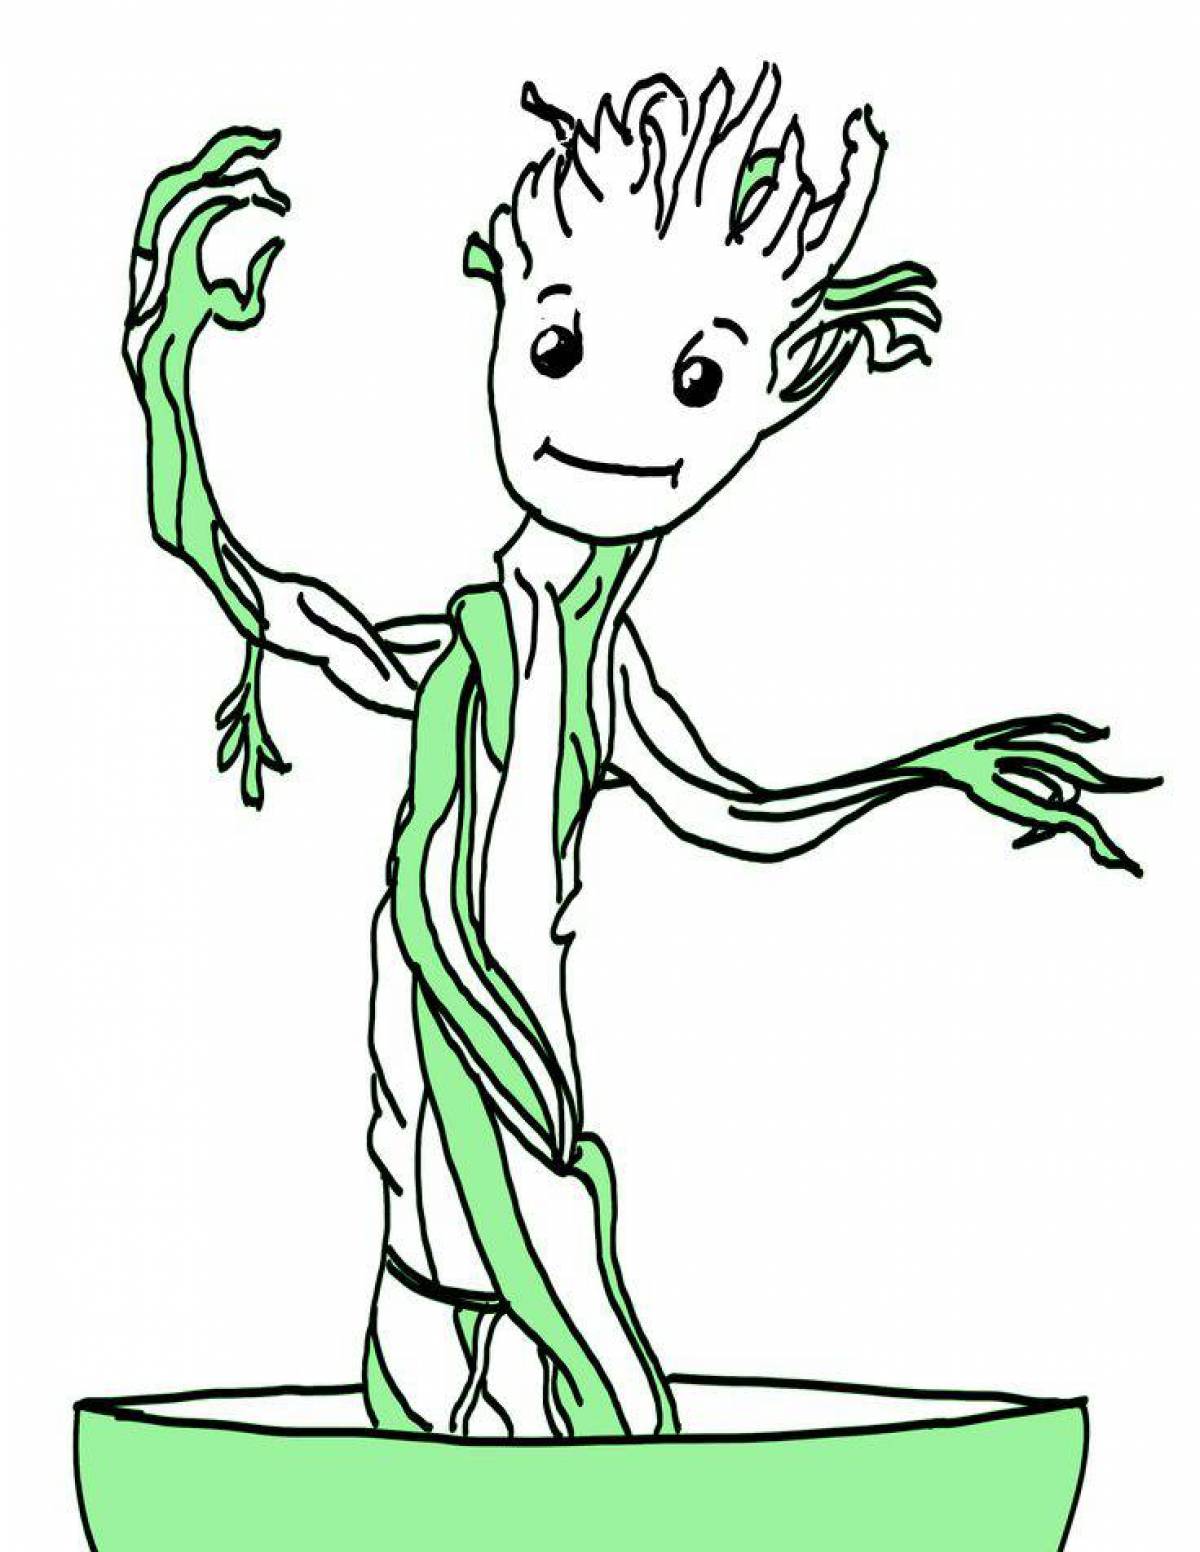 Groot's funny coloring book